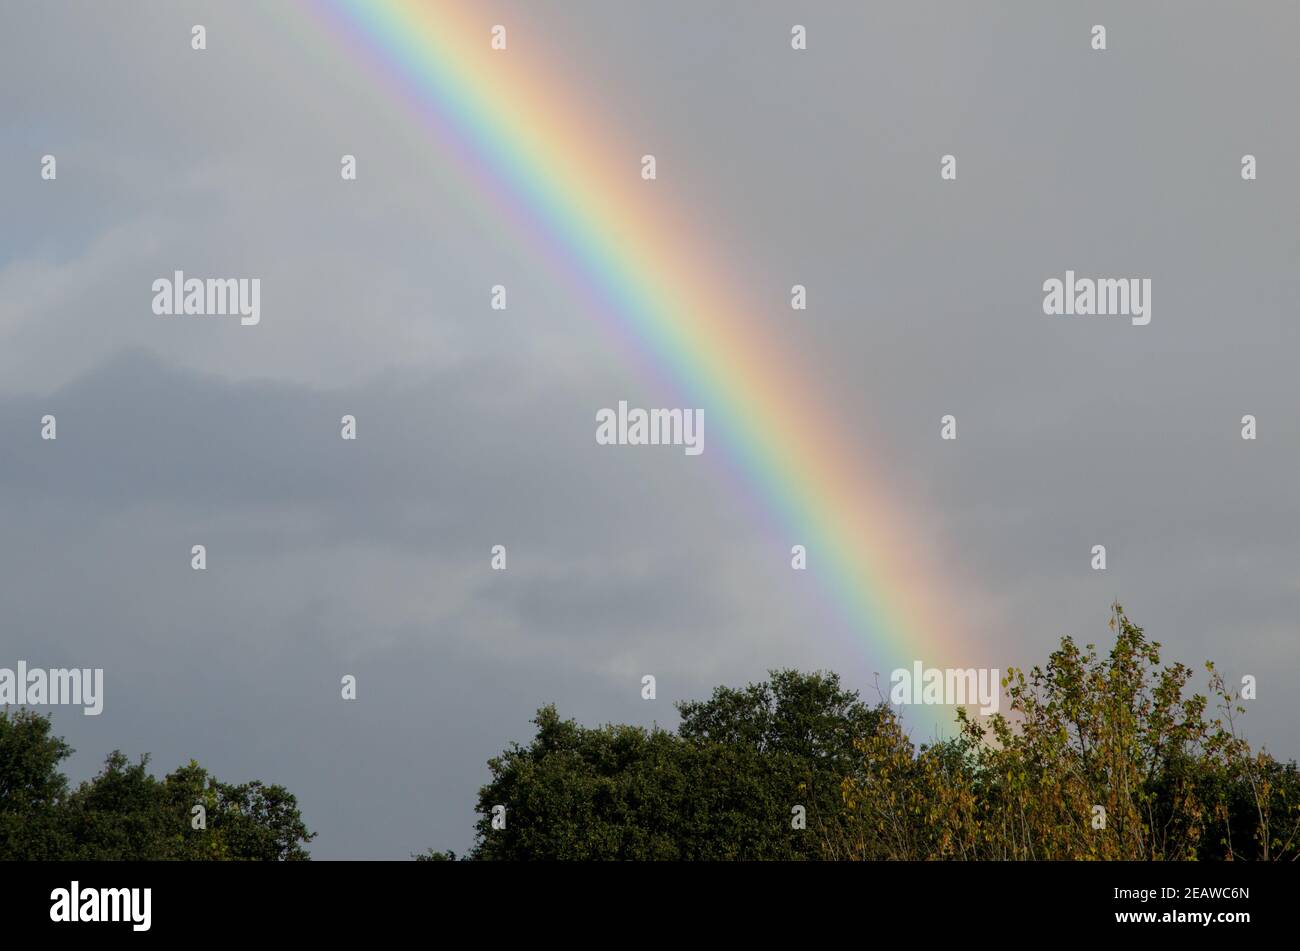 Rainbow over a forest. Stock Photo